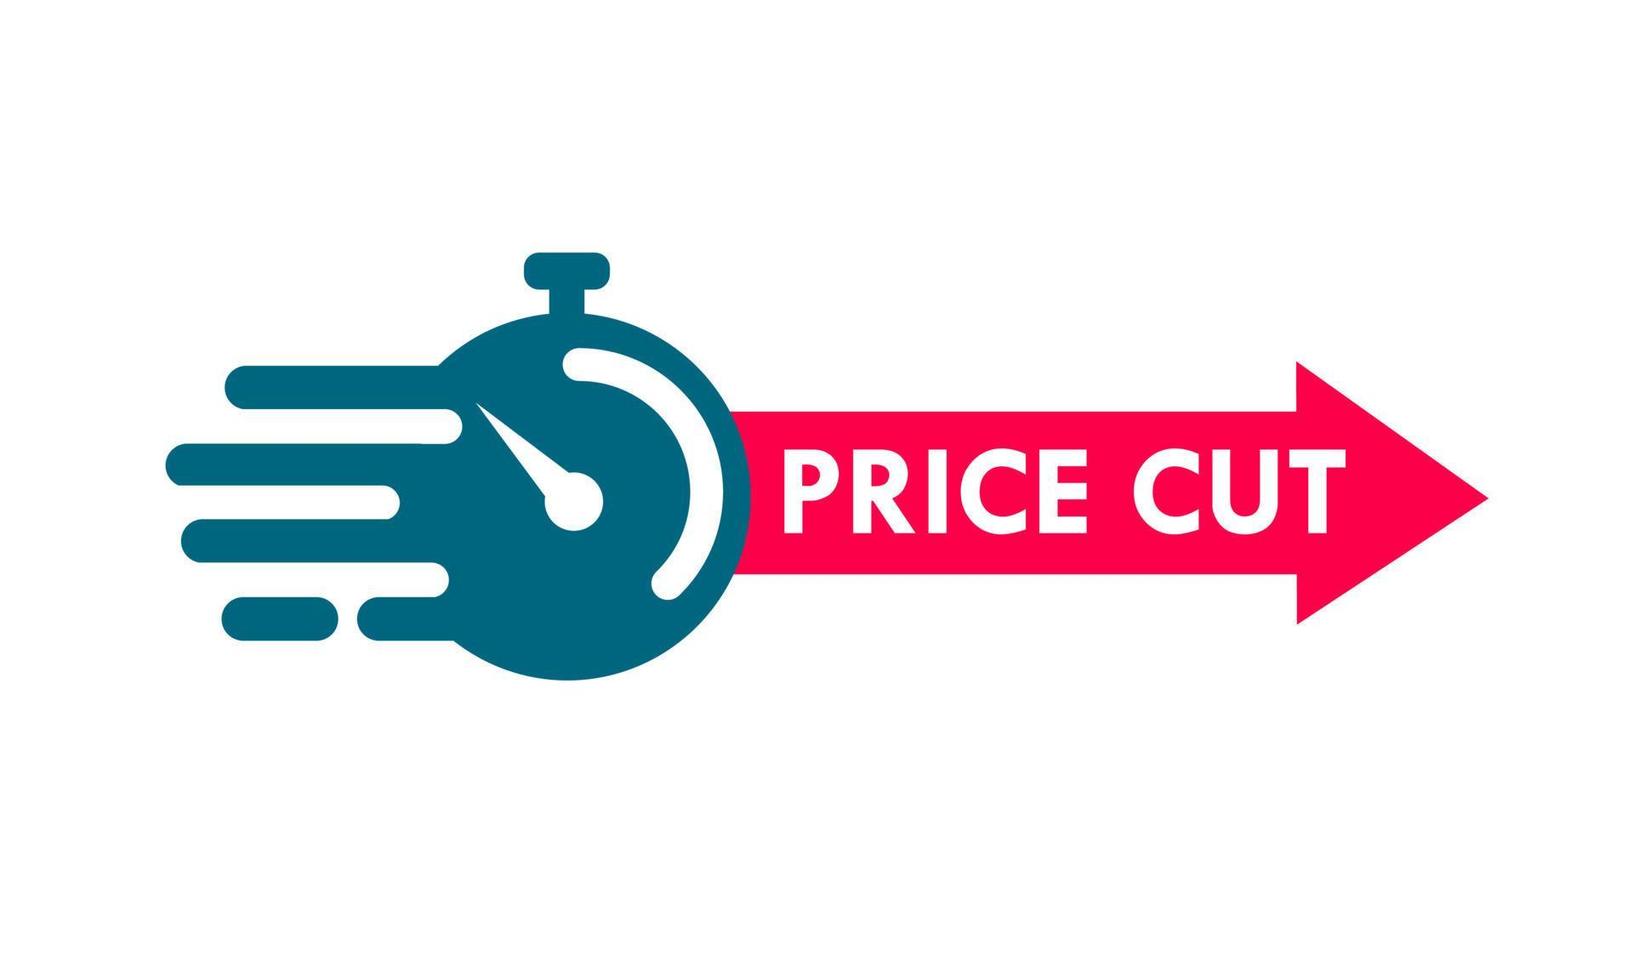 Price cut 10 label for promotion product vector